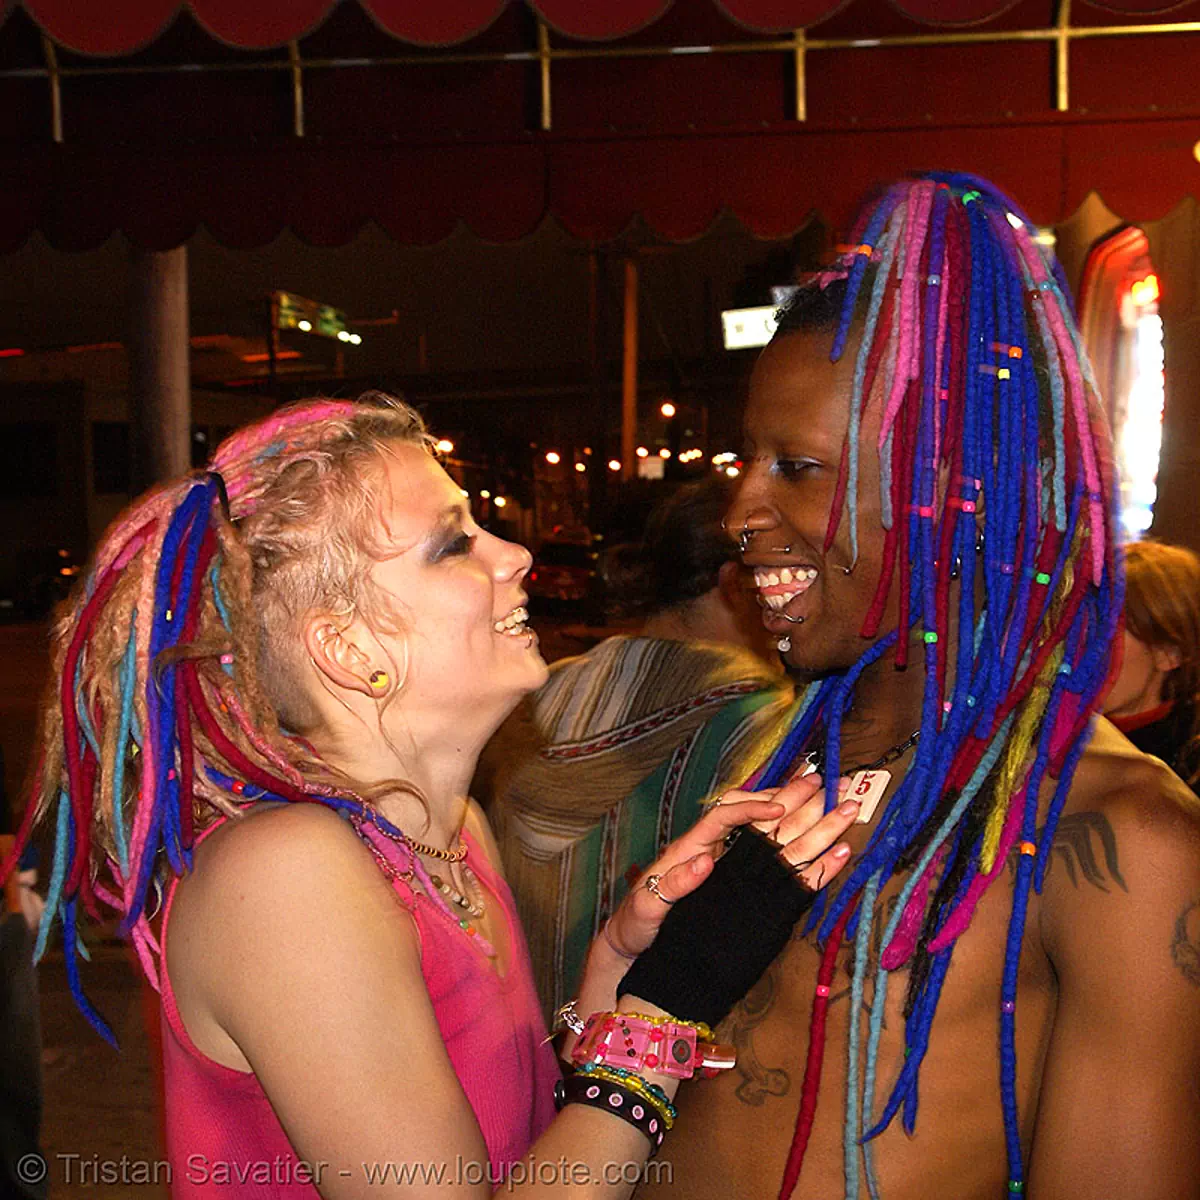 penny and page from the church of the perpetual party (san francisco), blue, church of the perpetual party, dreadlocks, man, night, page turner, penny arcade, perpetual-party.com, piercing, pink, qp, woman